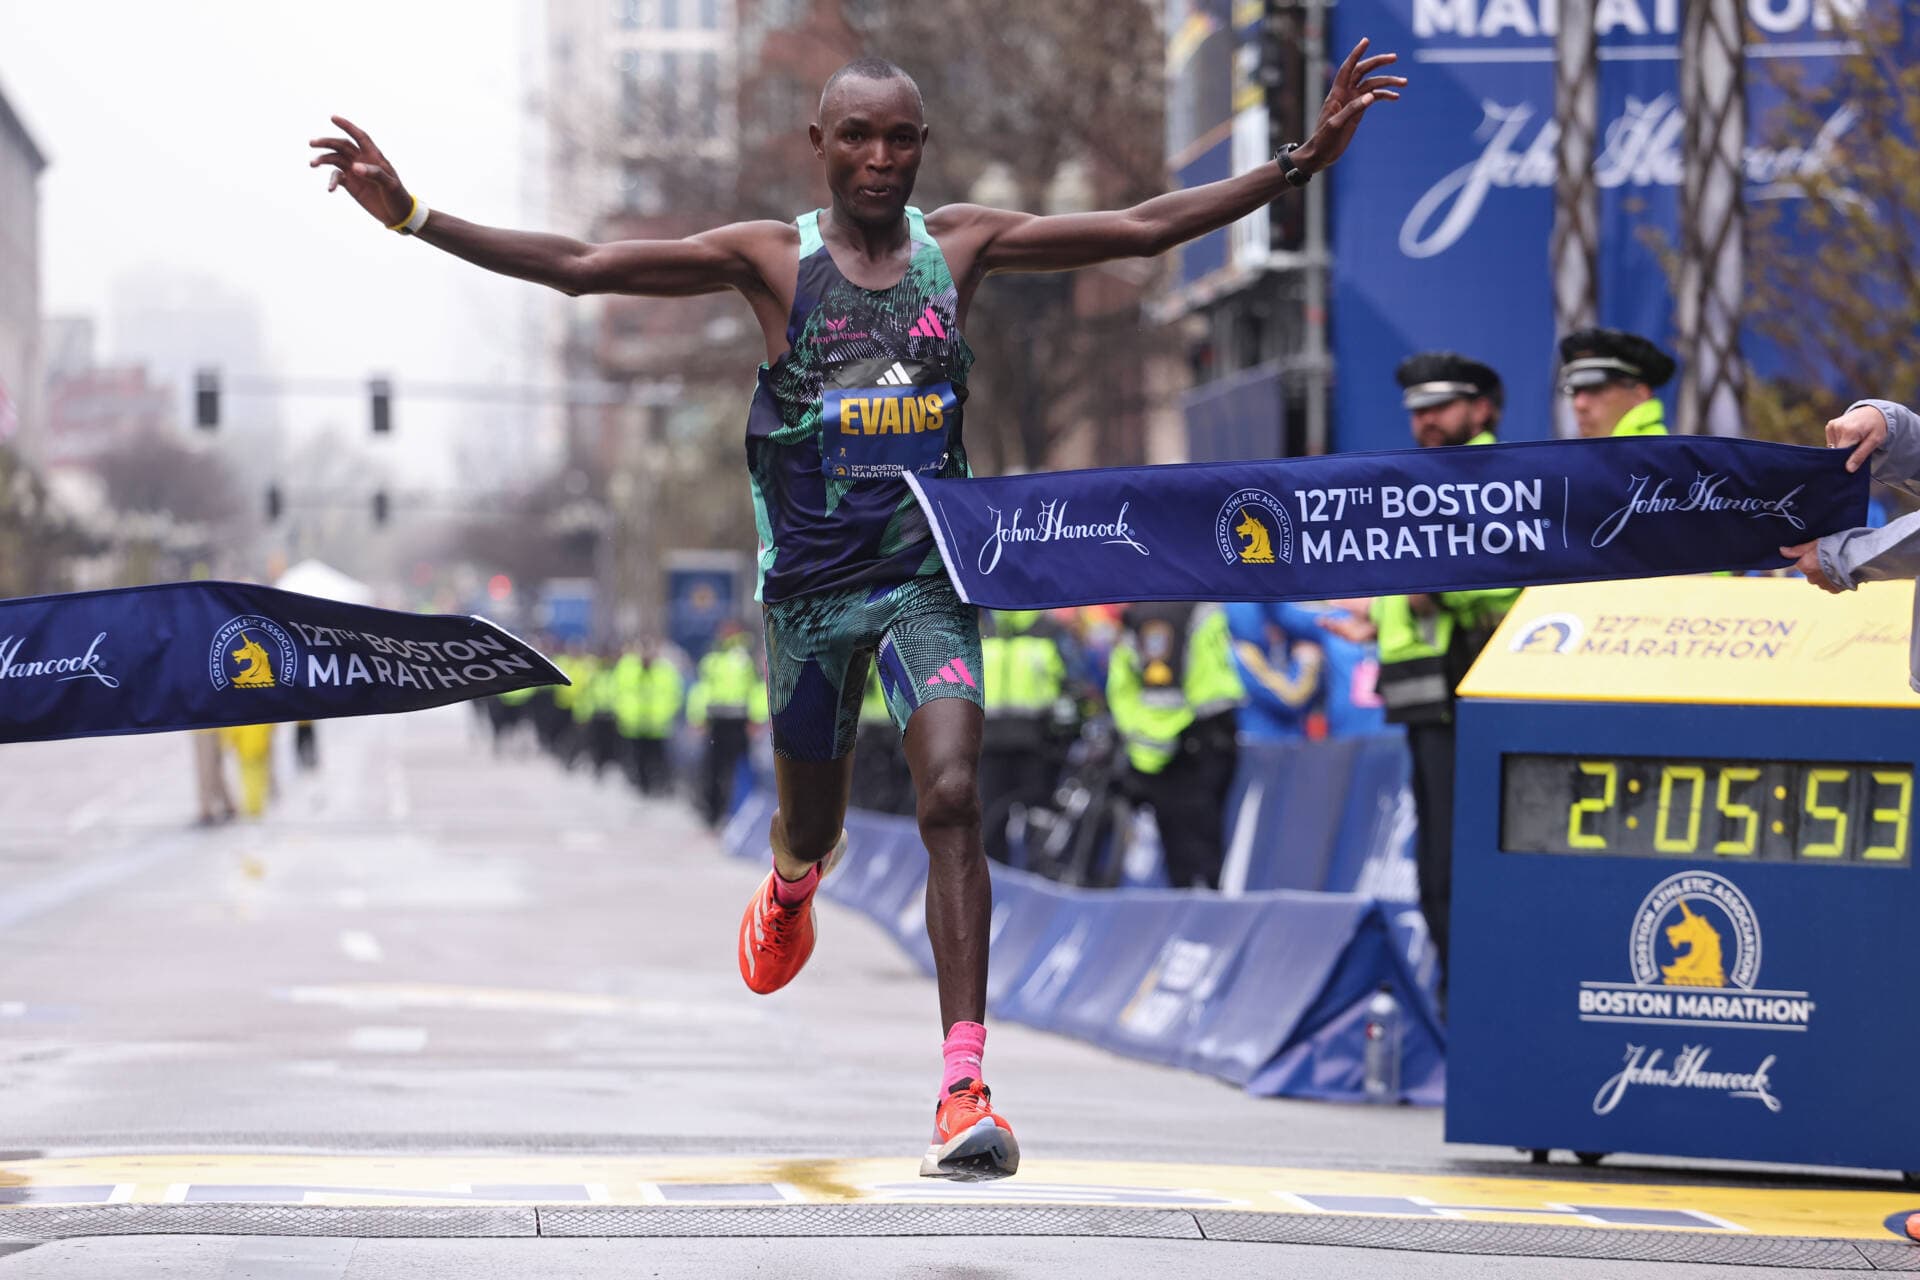 Evans Chebet, of Kenya, crosses the finish line and takes first place in the professional Men's Division during the 127th Boston Marathon on April 17, 2023. (Maddie Meyer/Getty Images)